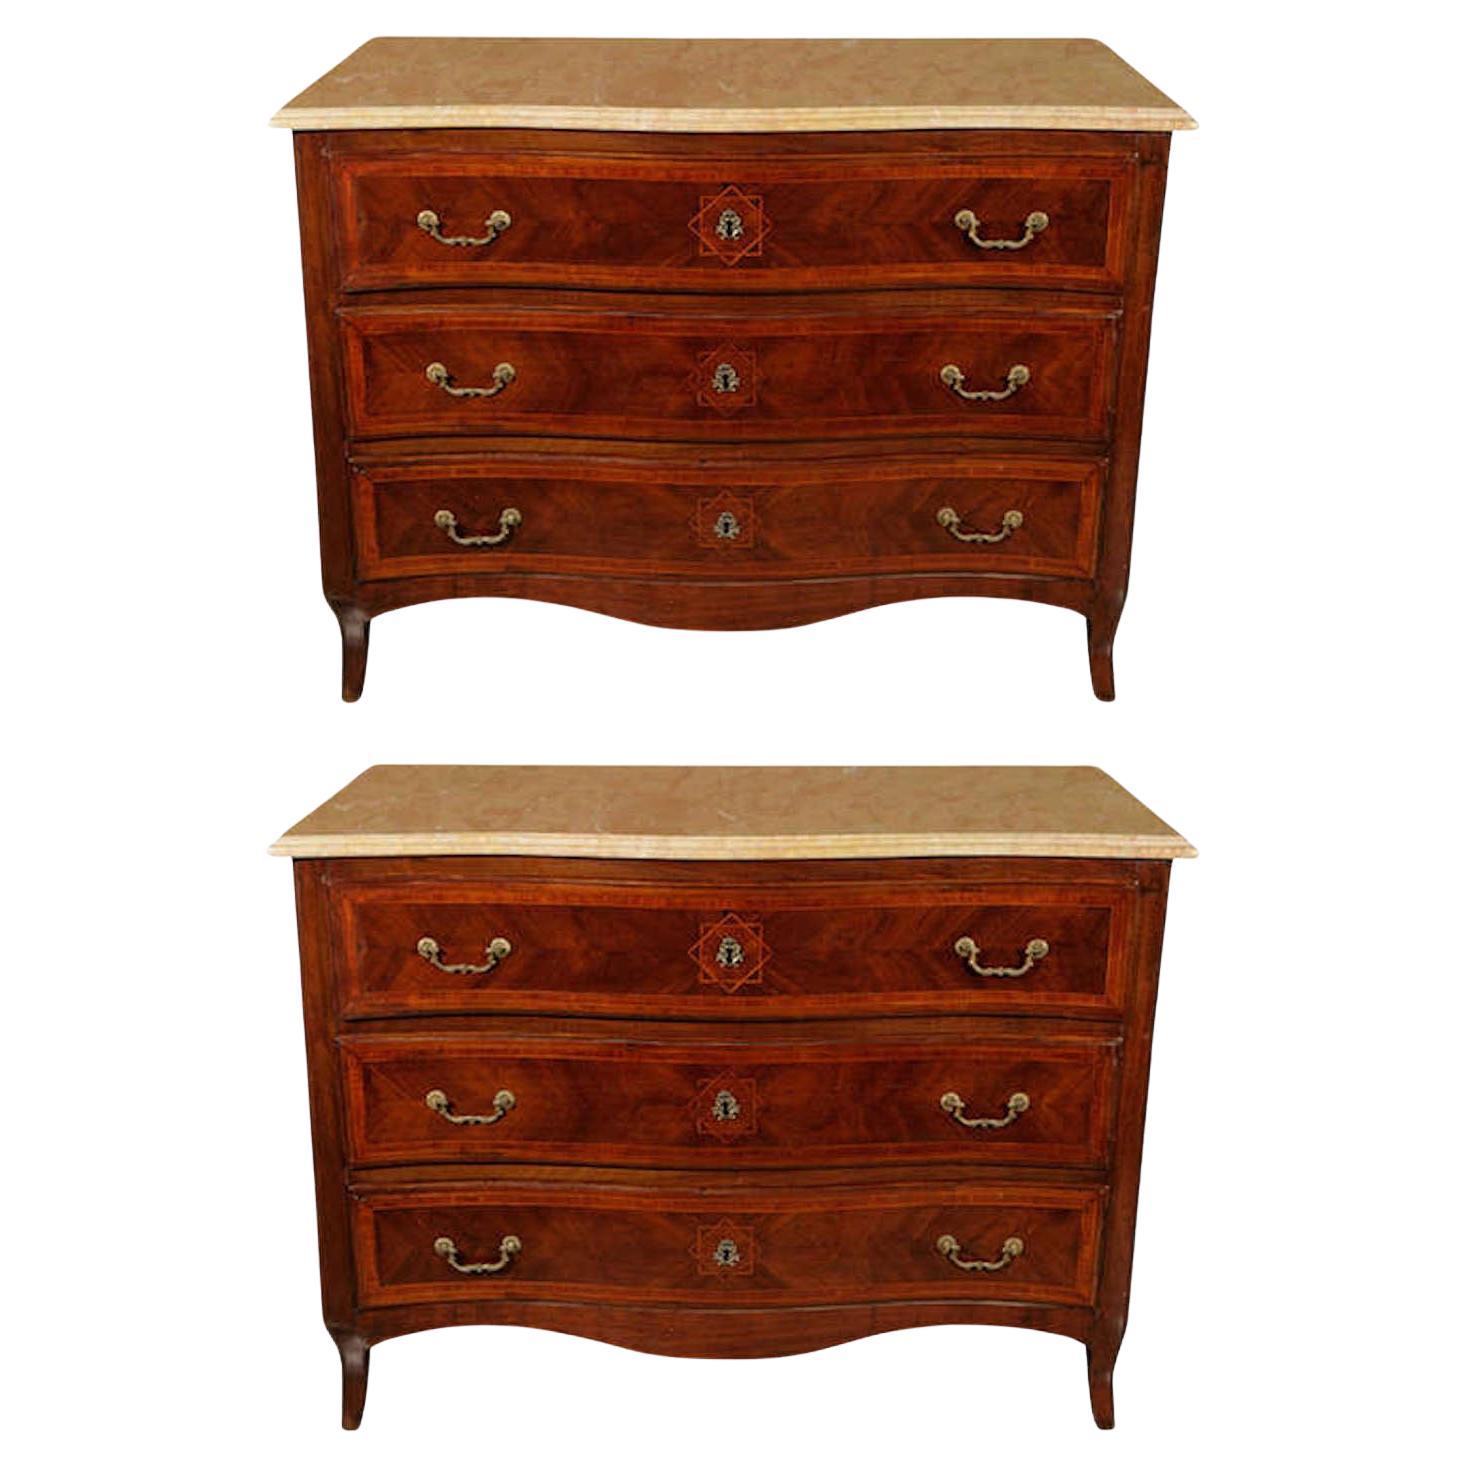 Pair of Veneered and Inlaid Commodes from Genoa For Sale